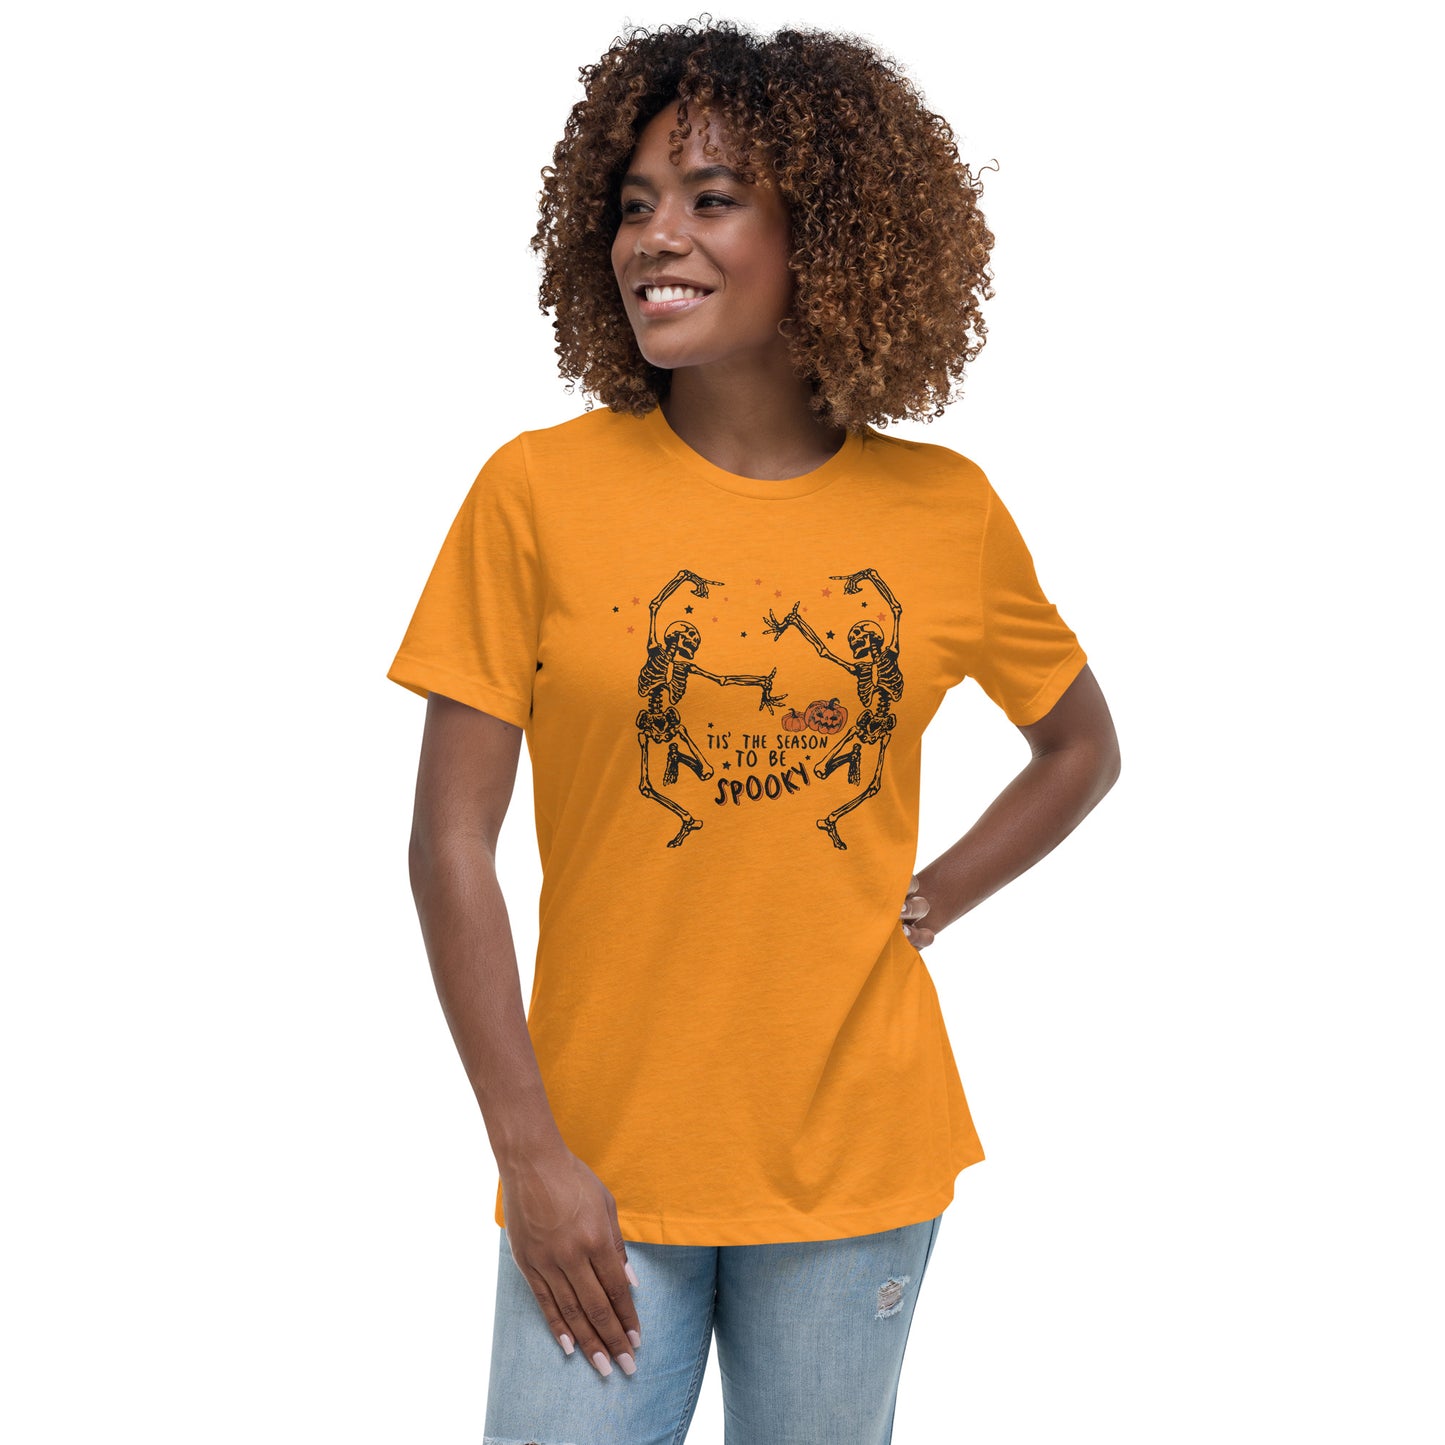 Tis the Season to be Spooky Women's Relaxed T-Shirt Tee Tshirt